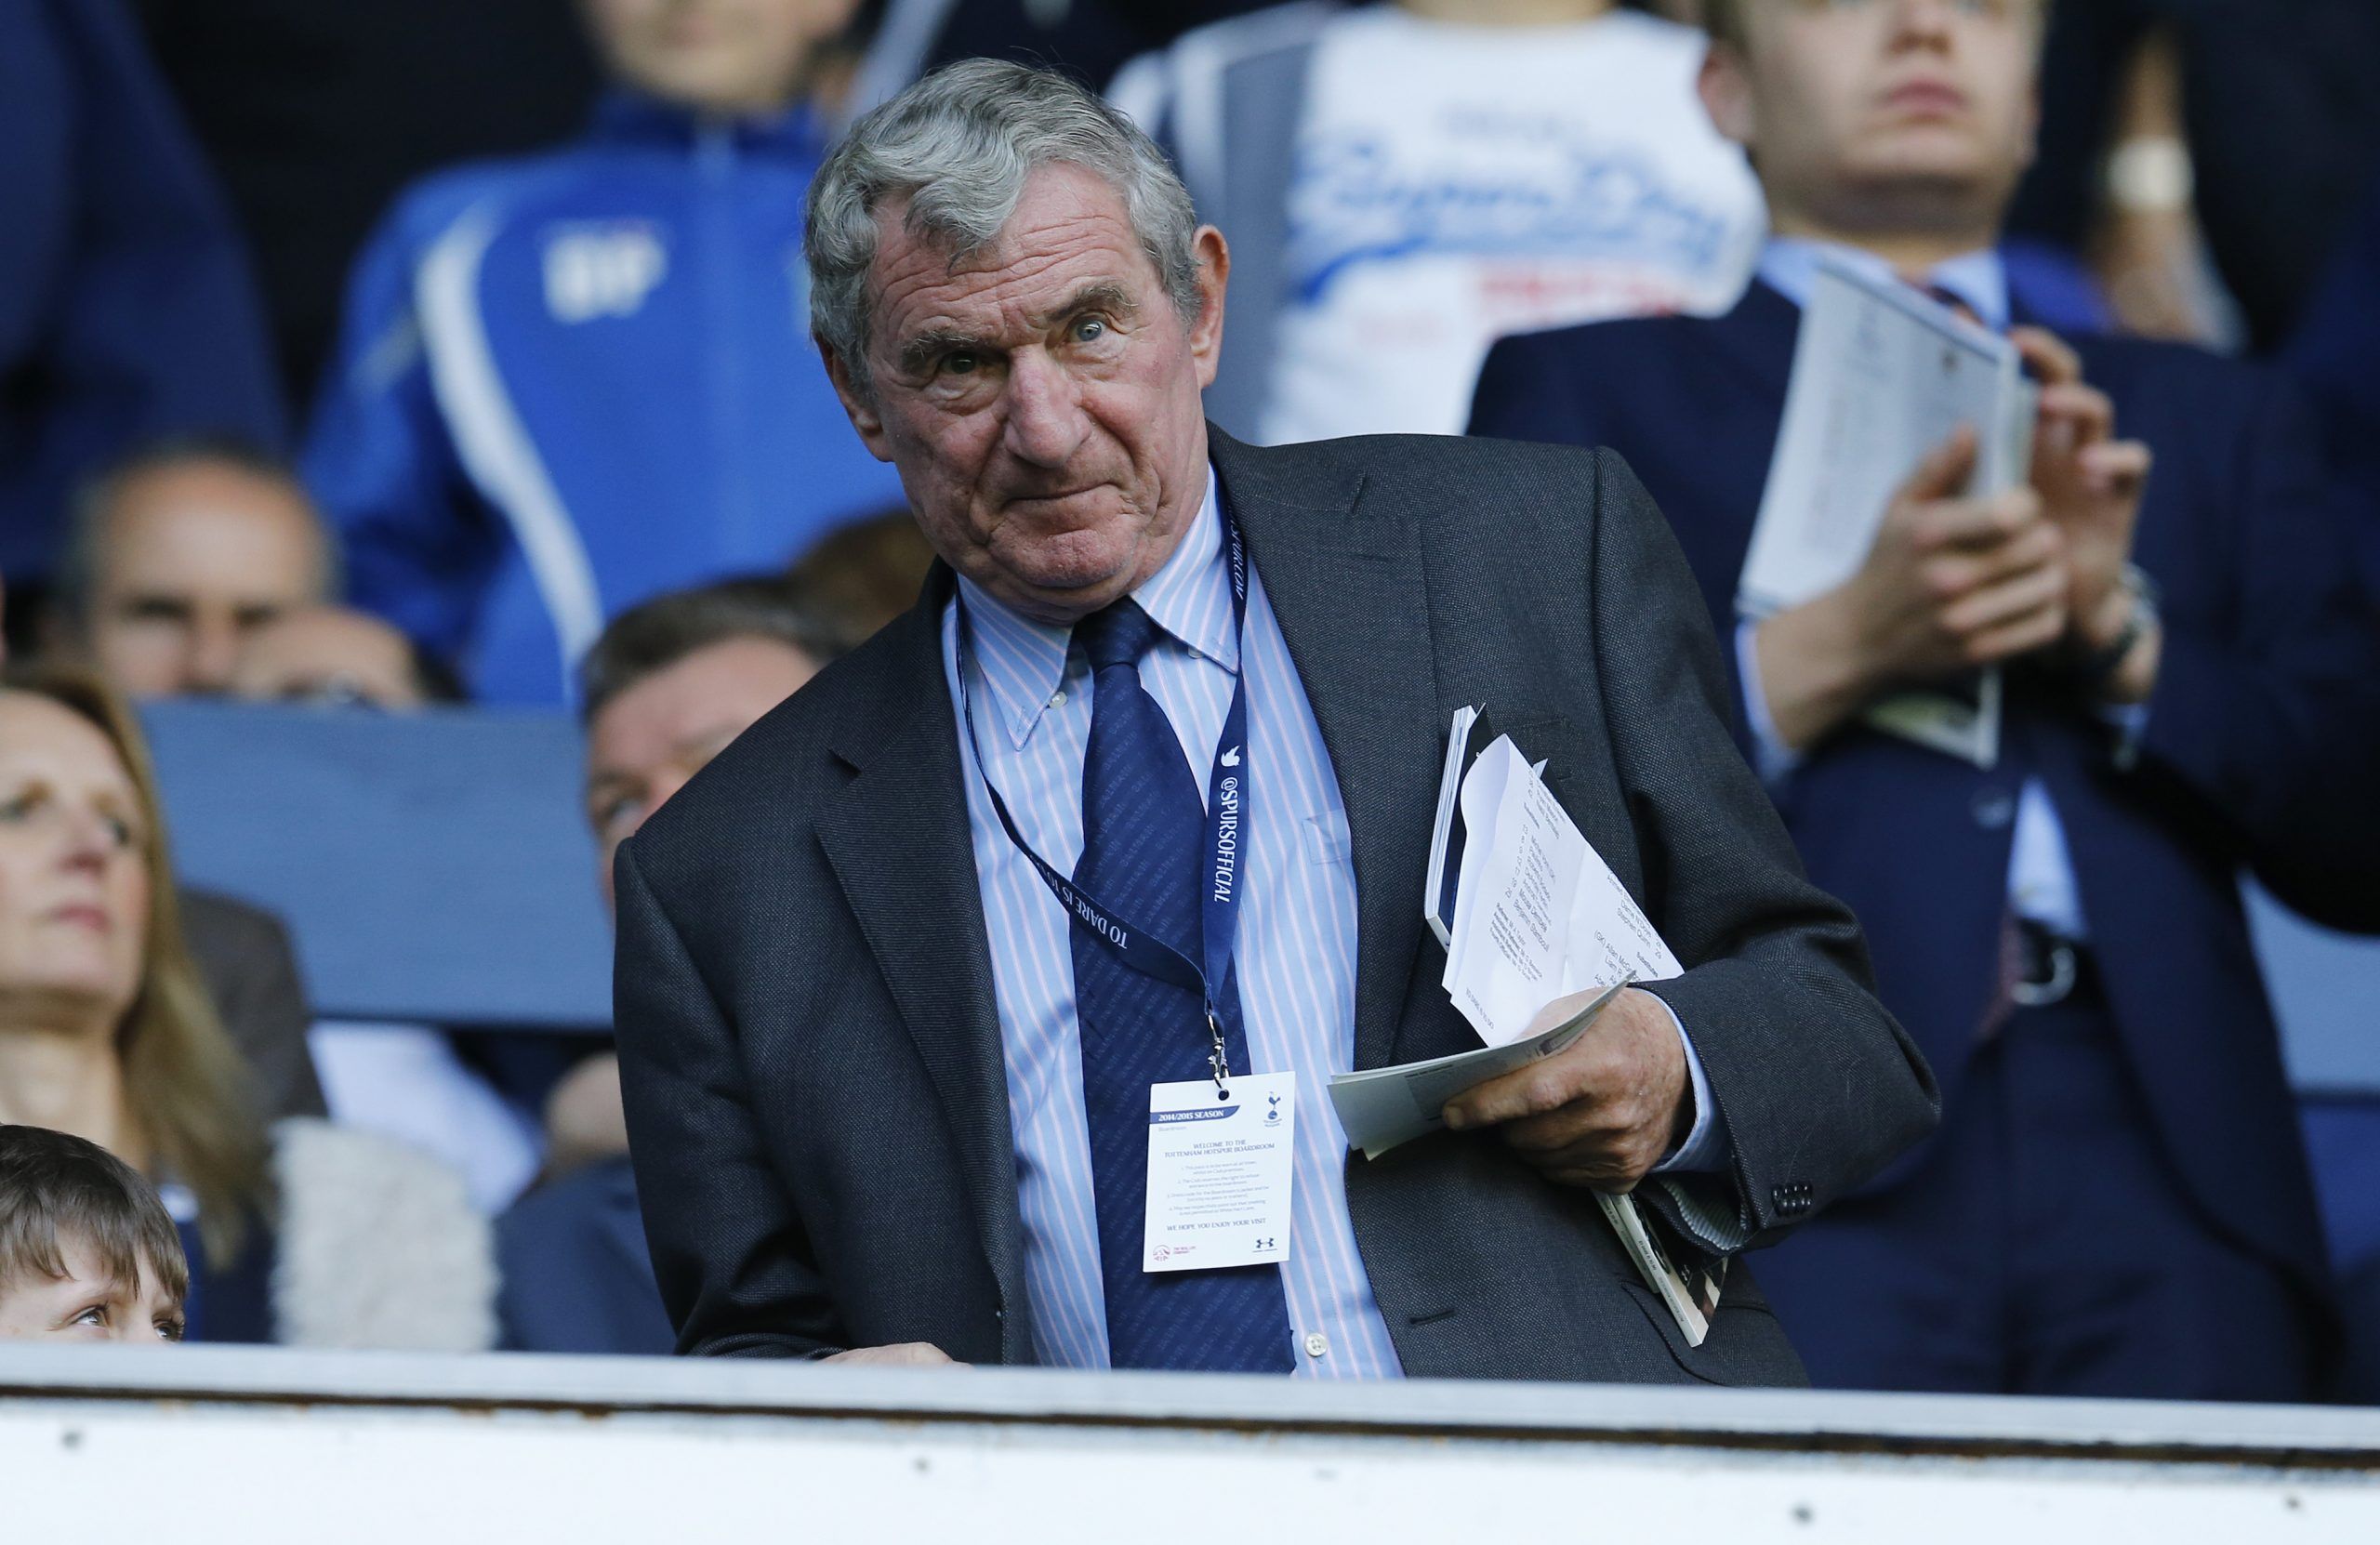 Football - Tottenham Hotspur v Hull City - Barclays Premier League - White Hart Lane - 14/15 - 16/5/15 
Former Tottenham Hotspur manager David Pleat in the stands 
Reuters / Suzanne Plunkett 
EDITORIAL USE ONLY. No use with unauthorized audio, video, data, fixture lists, club/league logos or 